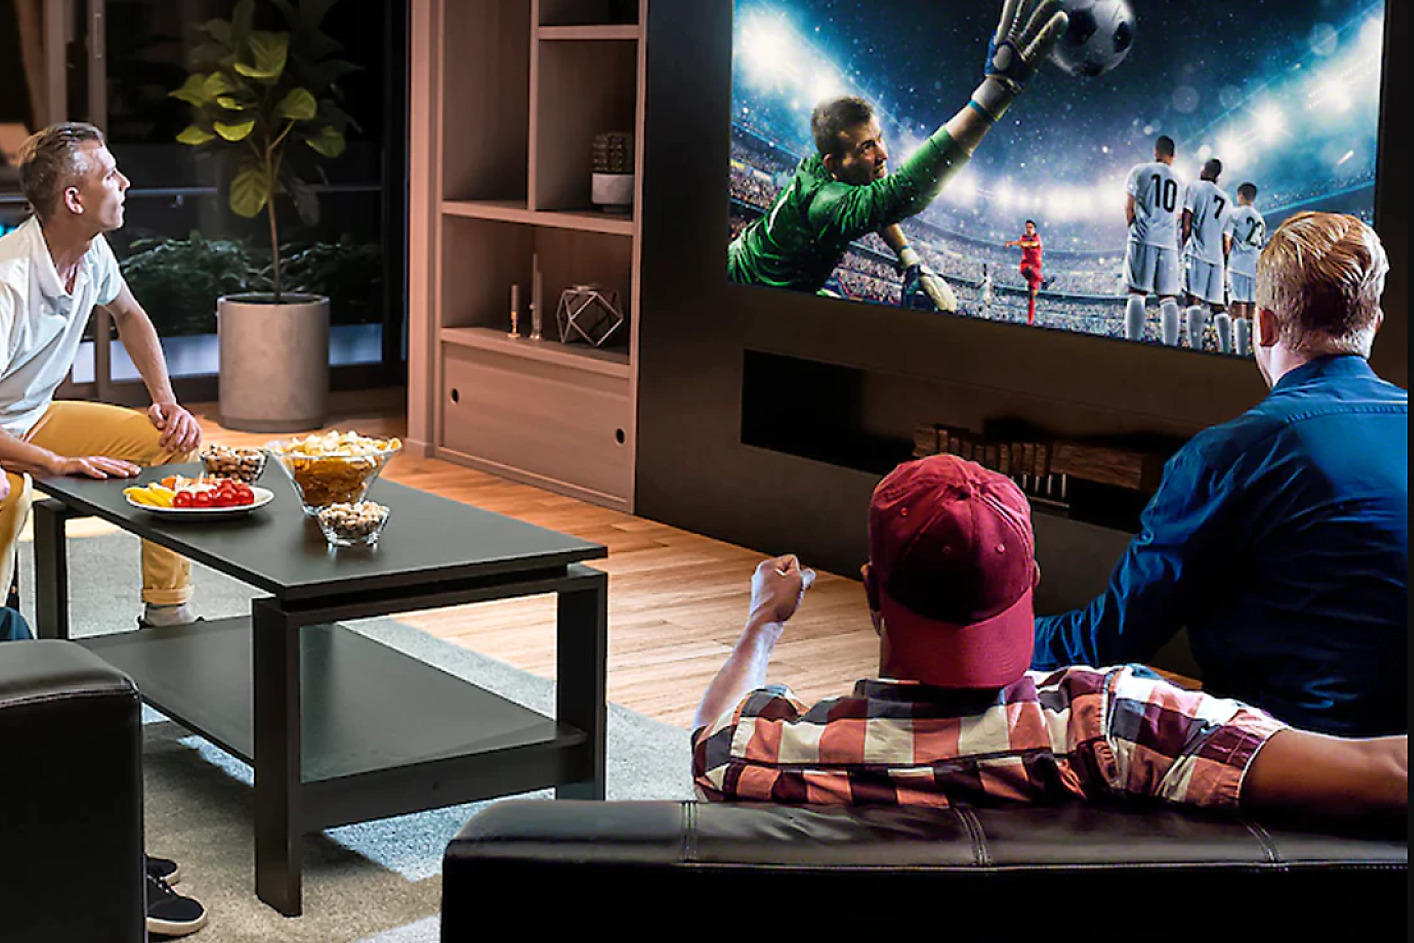 Three people in a living room watch a TV displaying a goalie jumping to catch a football.